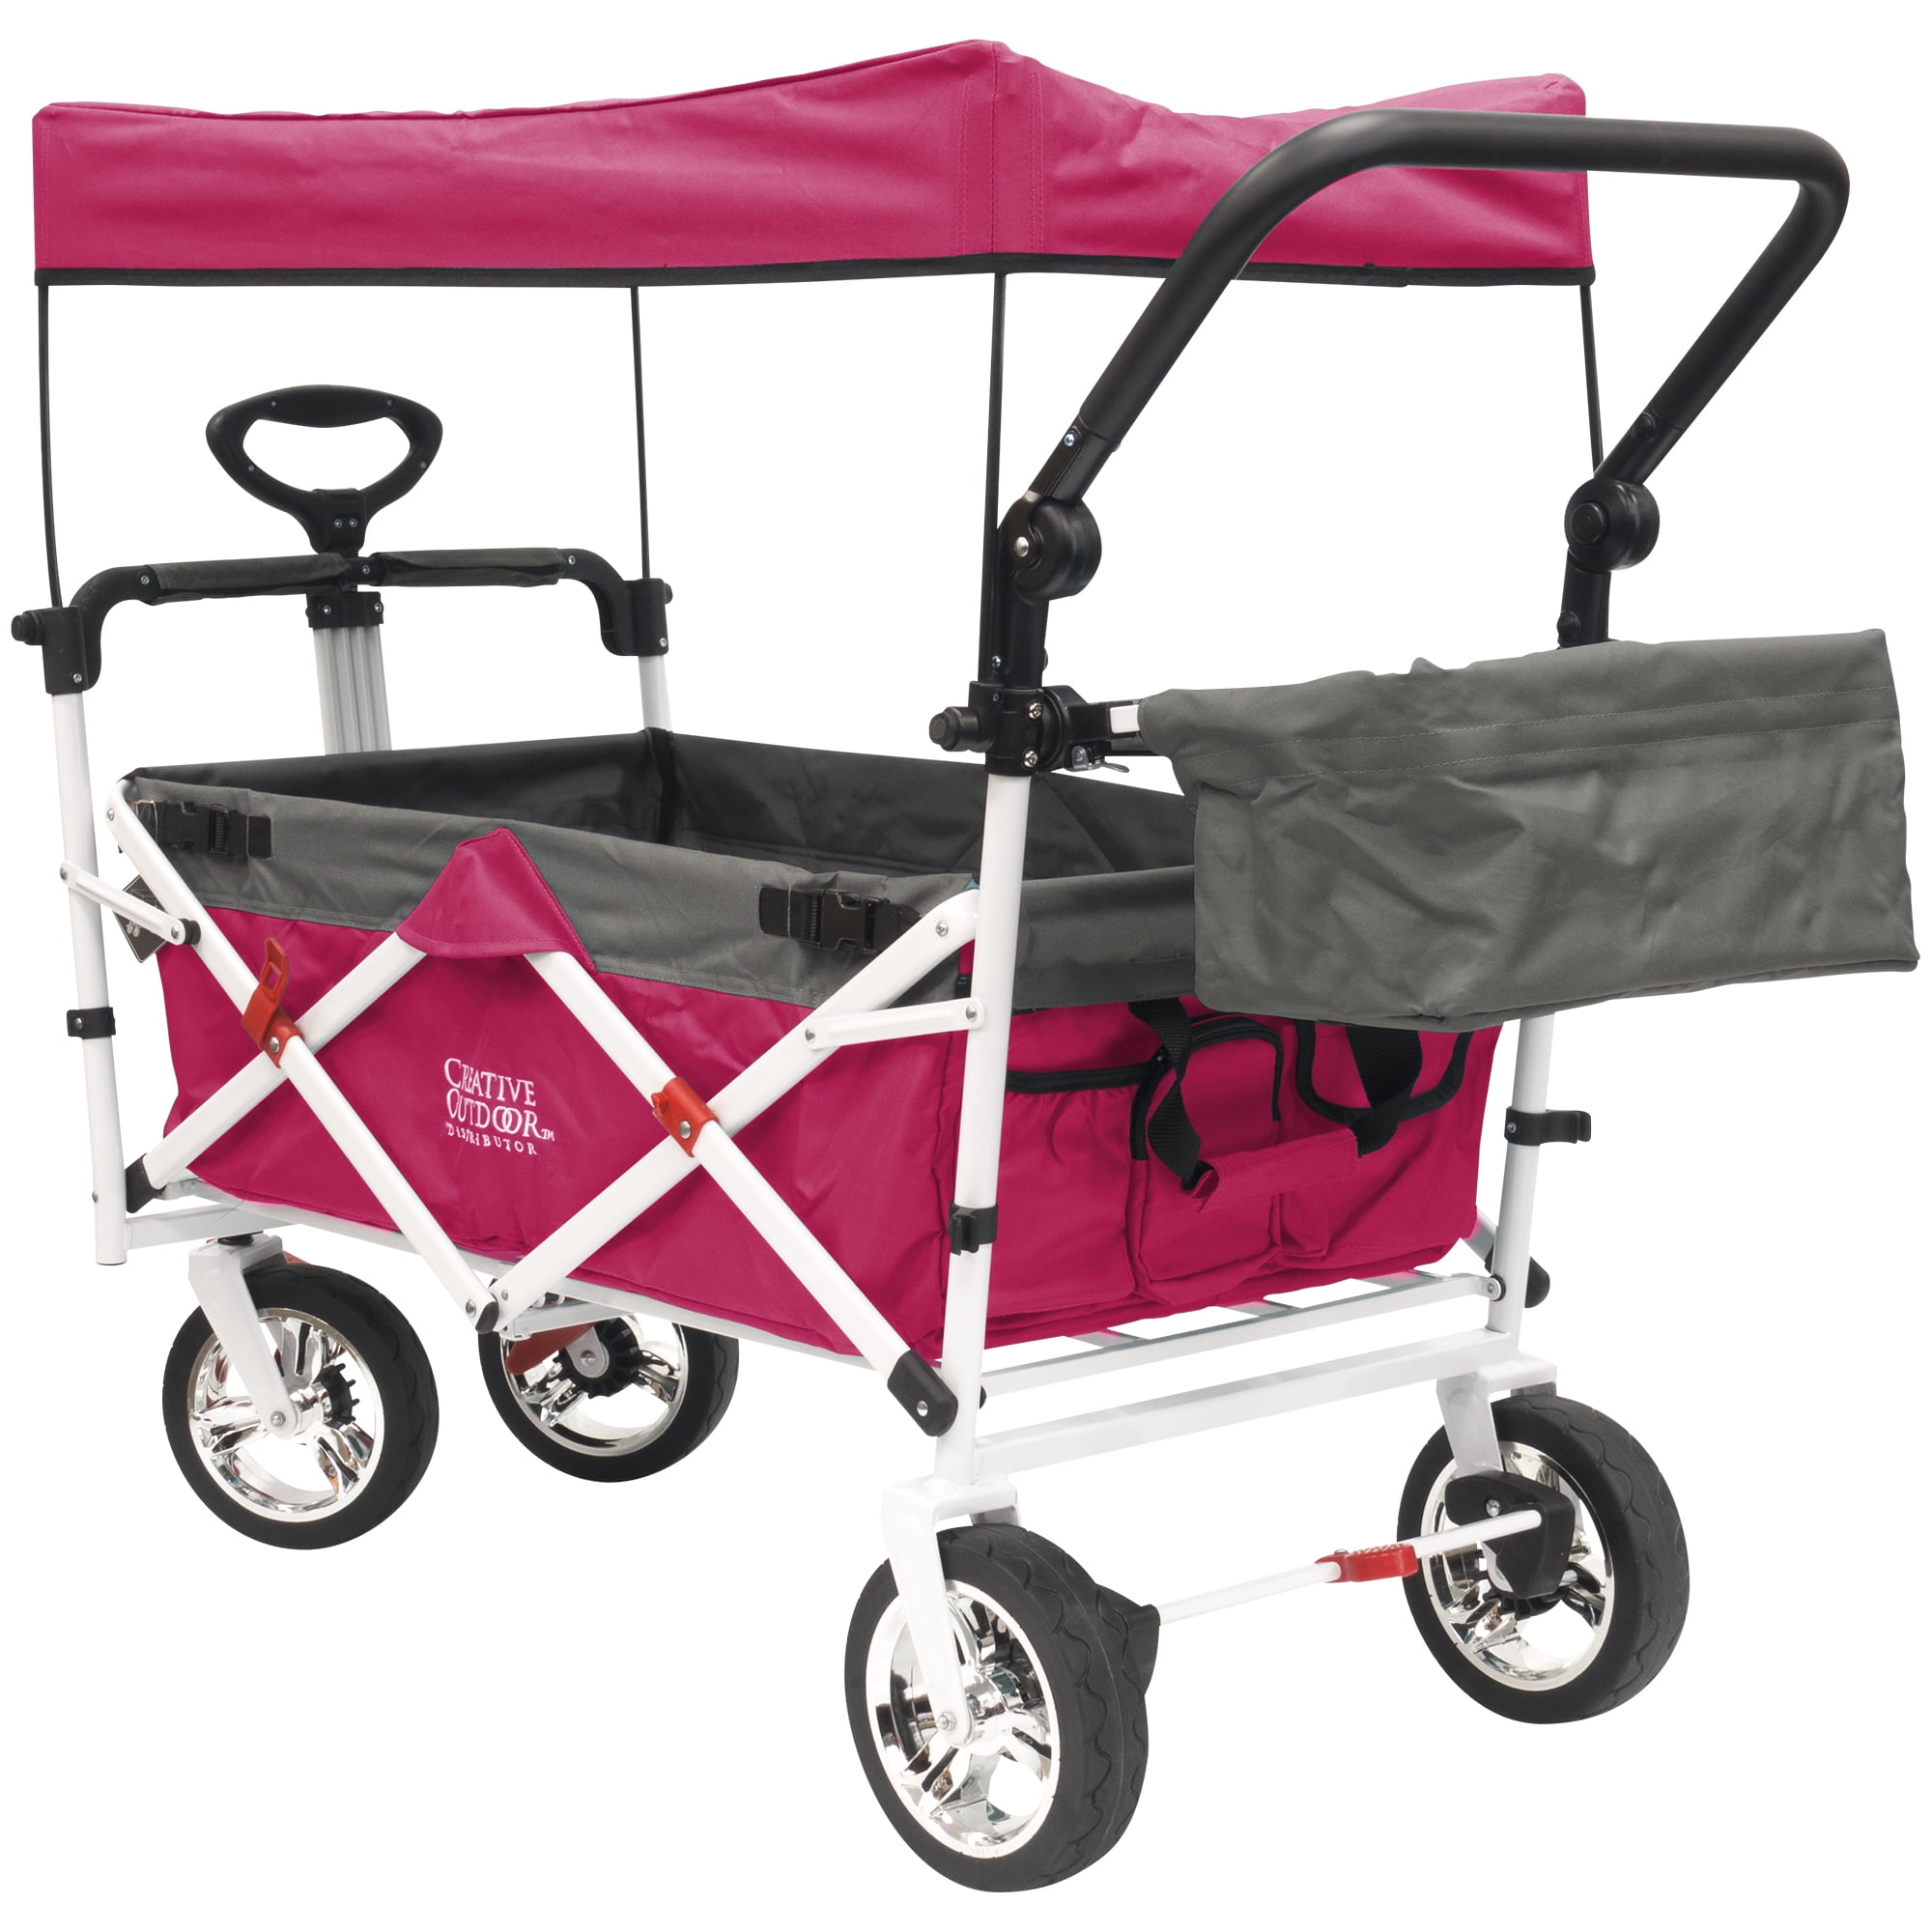 Creative Outdoor Push Pull Collapsible Folding Wagon Black 